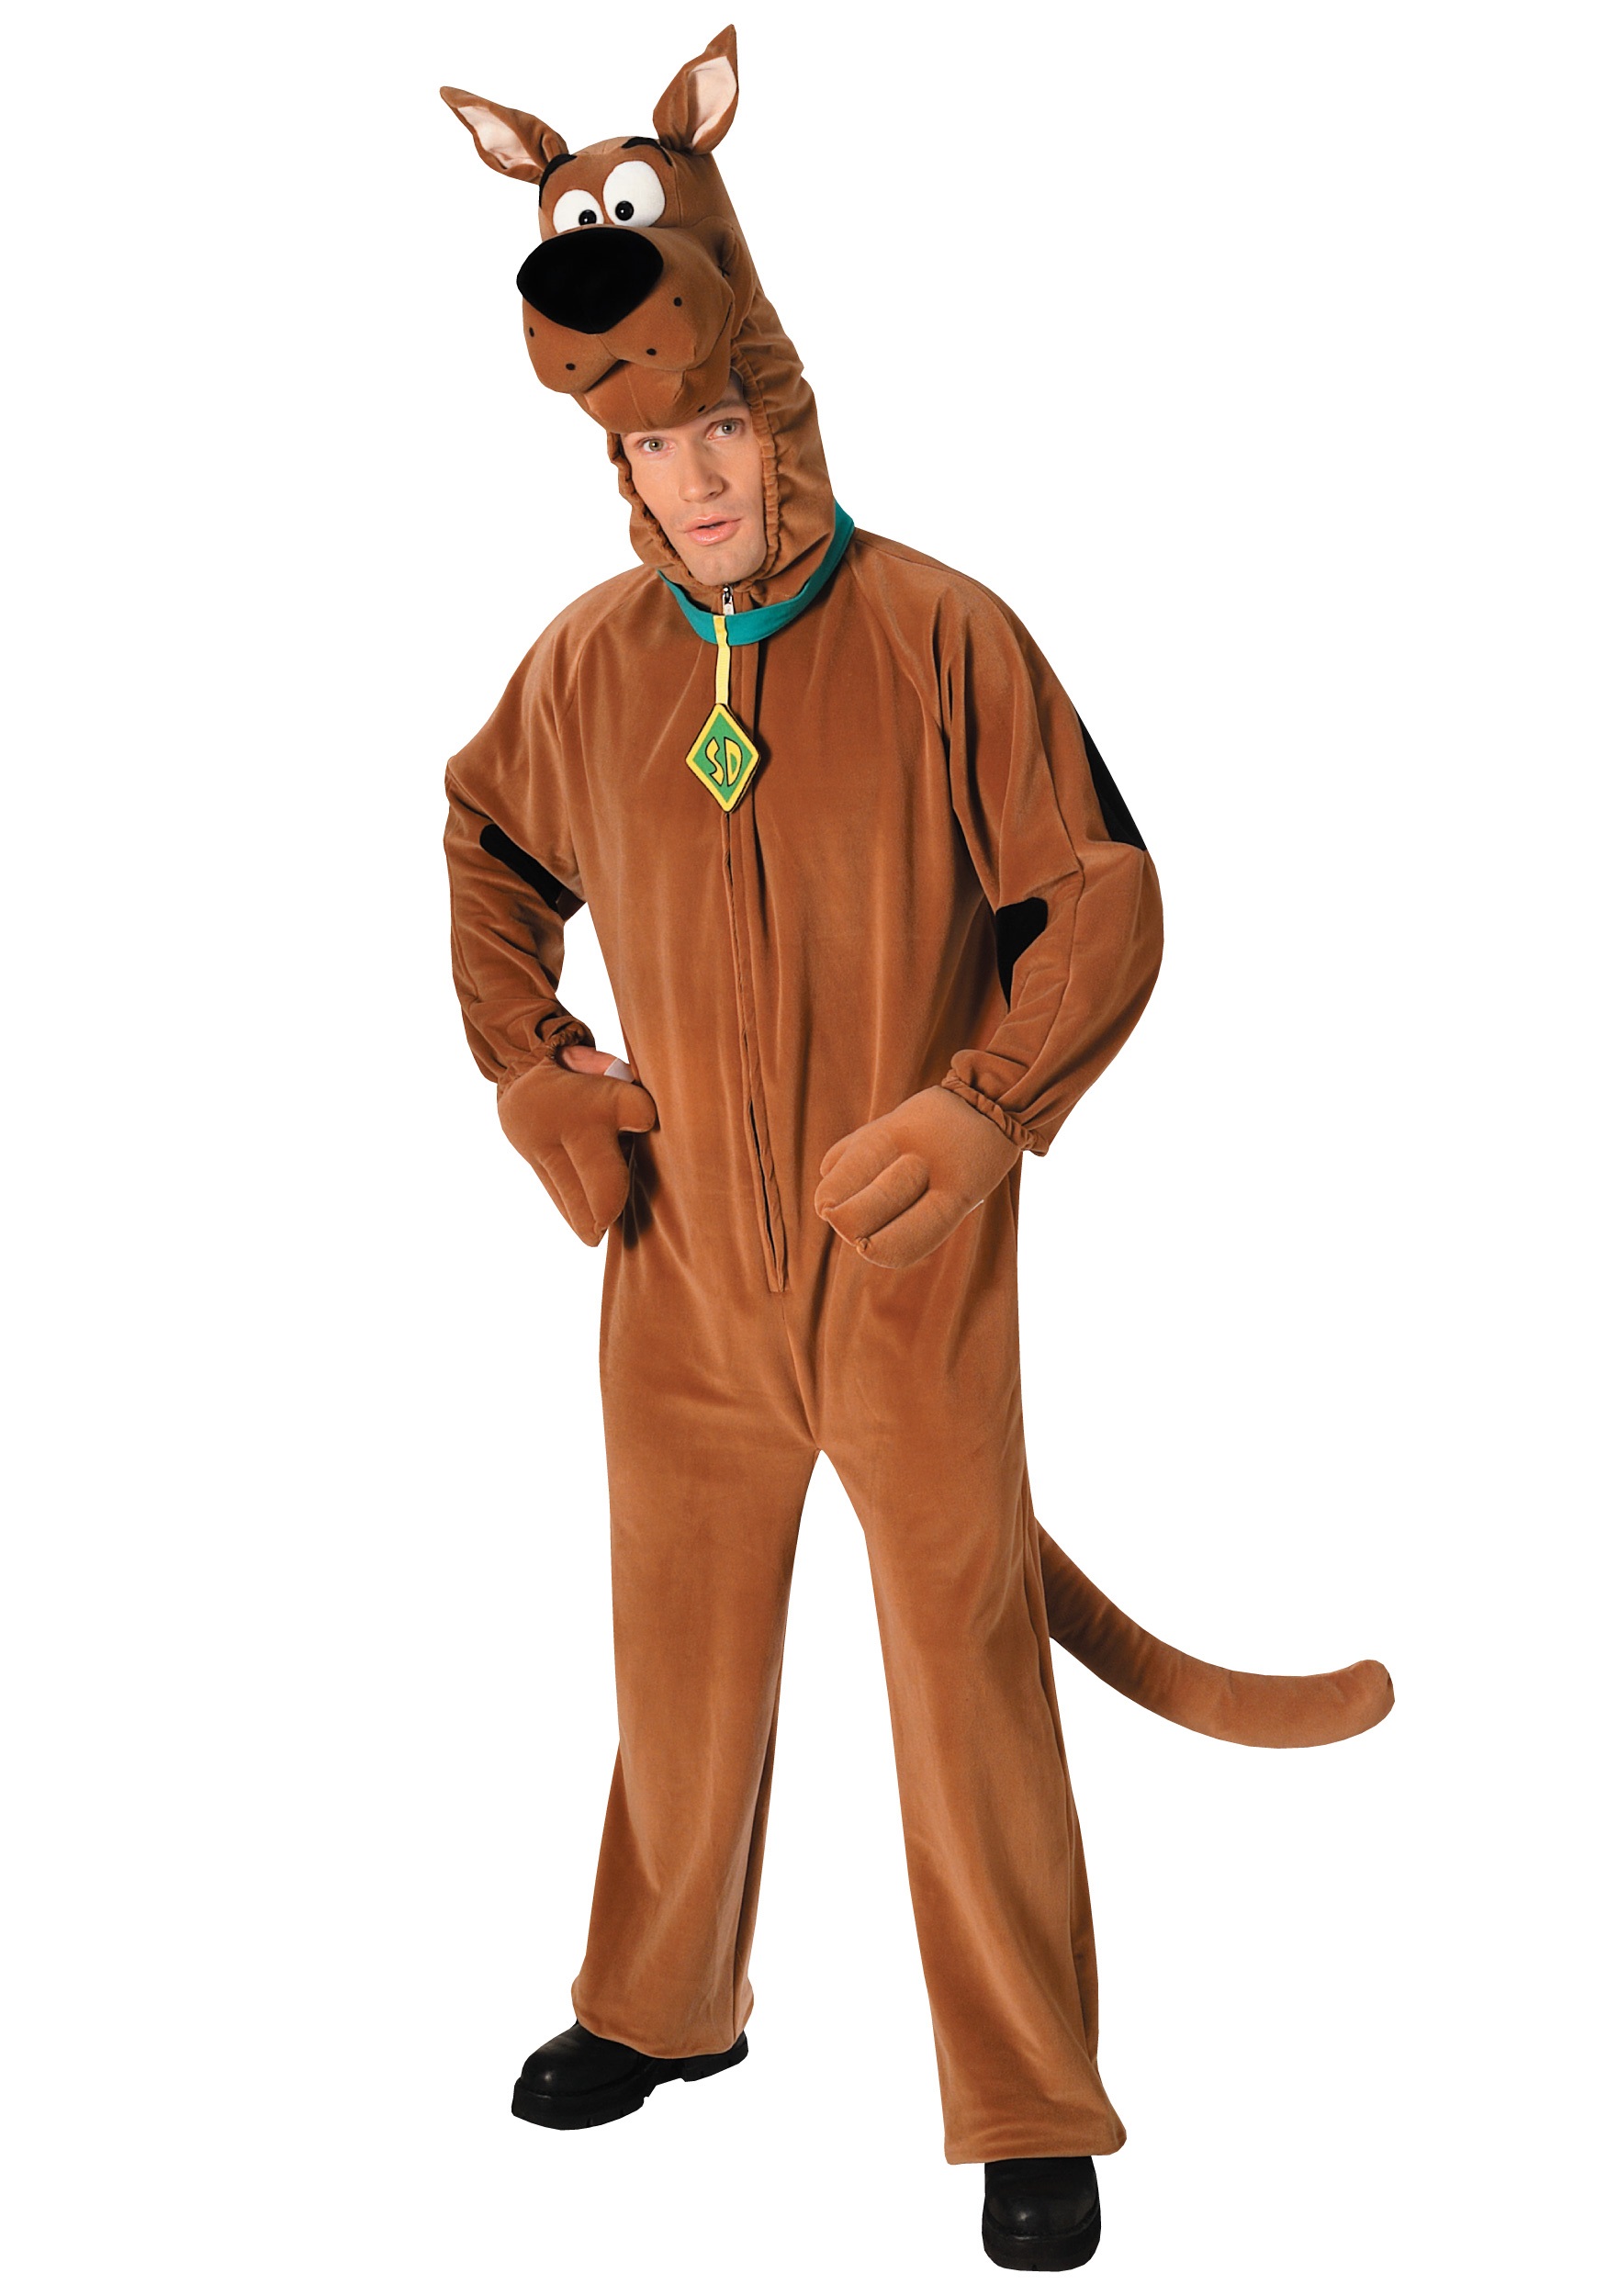 https://images.halloweencostumes.co.uk/products/8572/1-1/adult-deluxe-scooby-doo-costume.jpg